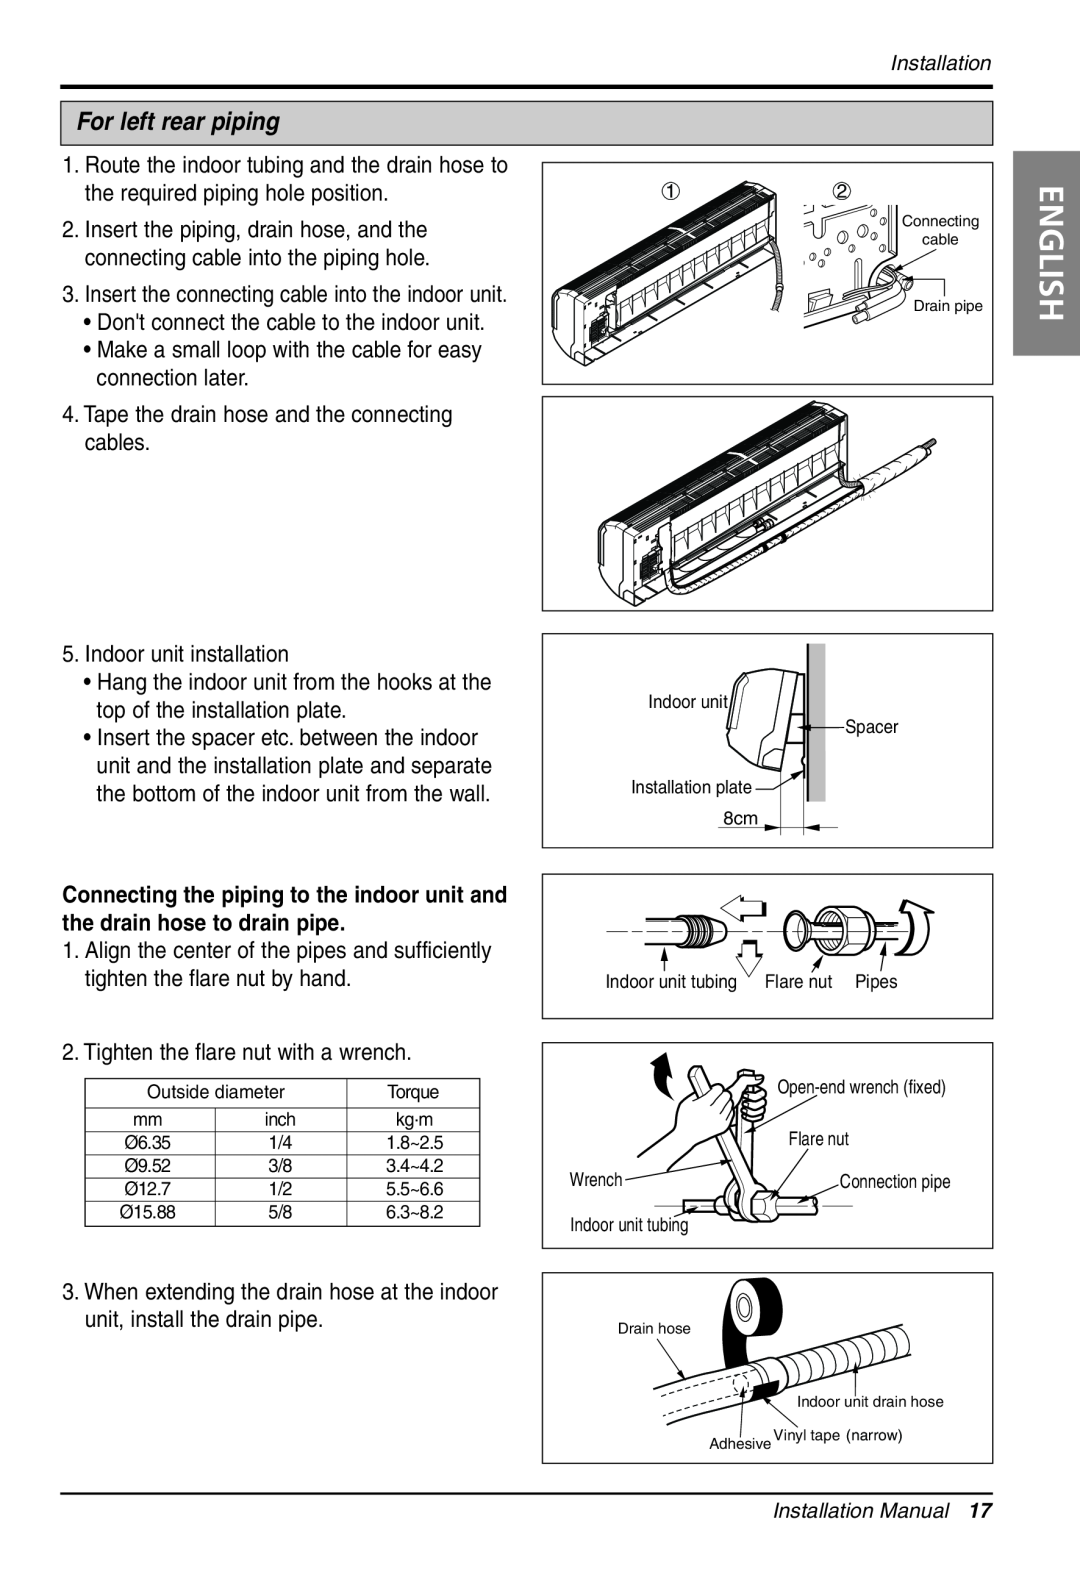 LG Electronics LS305HV installation manual For left rear piping, English 